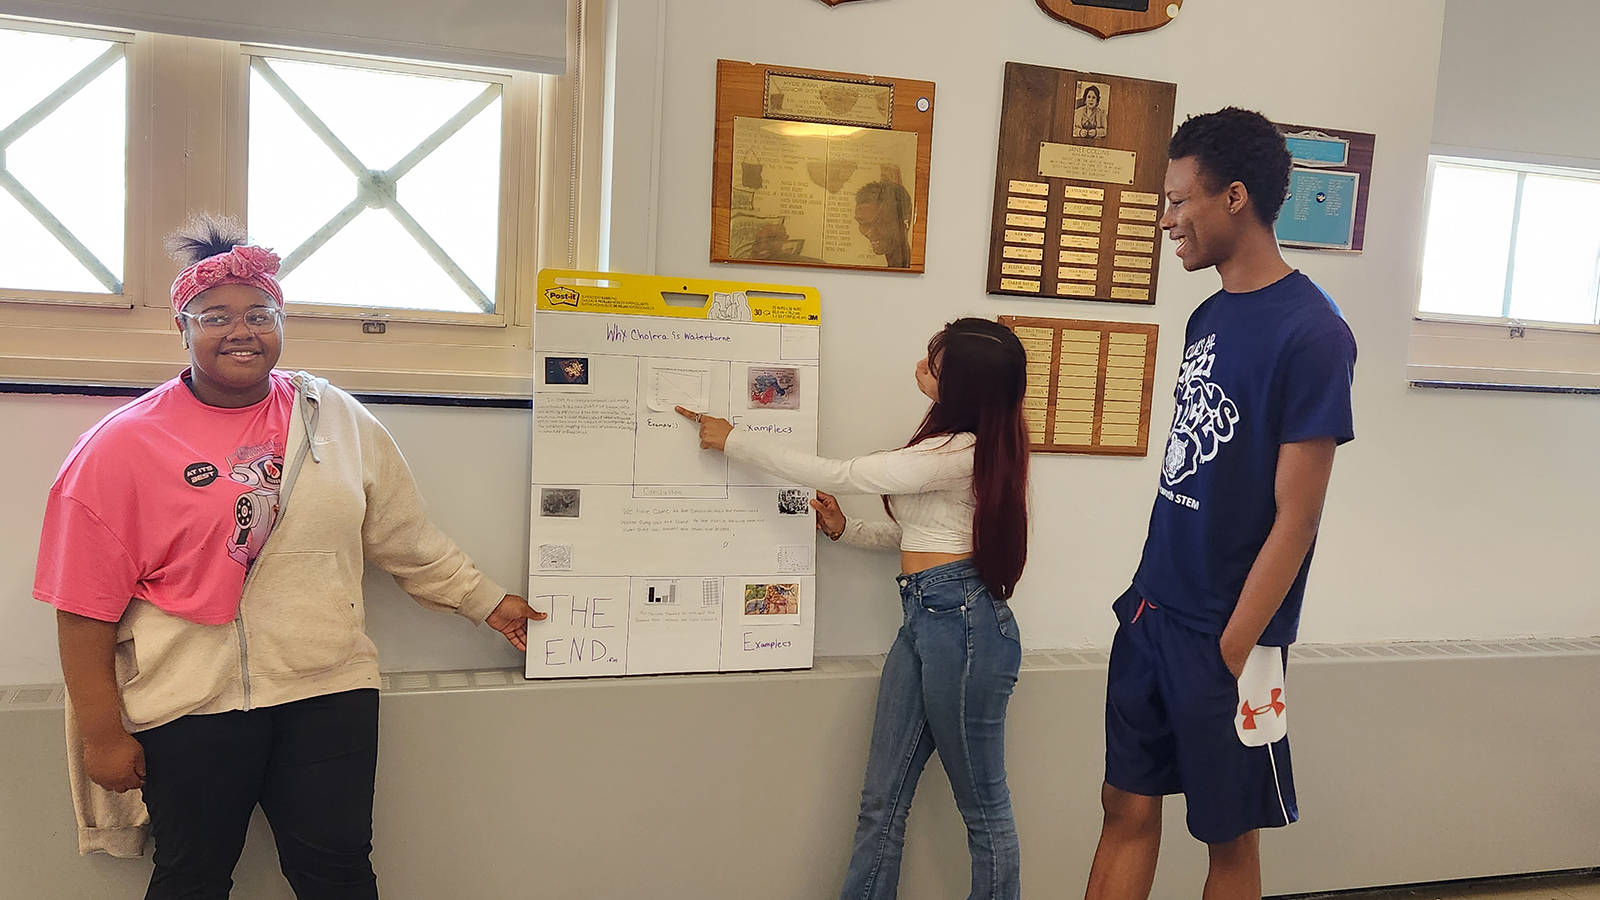 At the end of the teacher institute’s second week, students presented data findings to prove that cholera is water-borne. The students’ success demonstrated the teachers’ own success in applying data science to real-world problems that they can explore in the classroom.